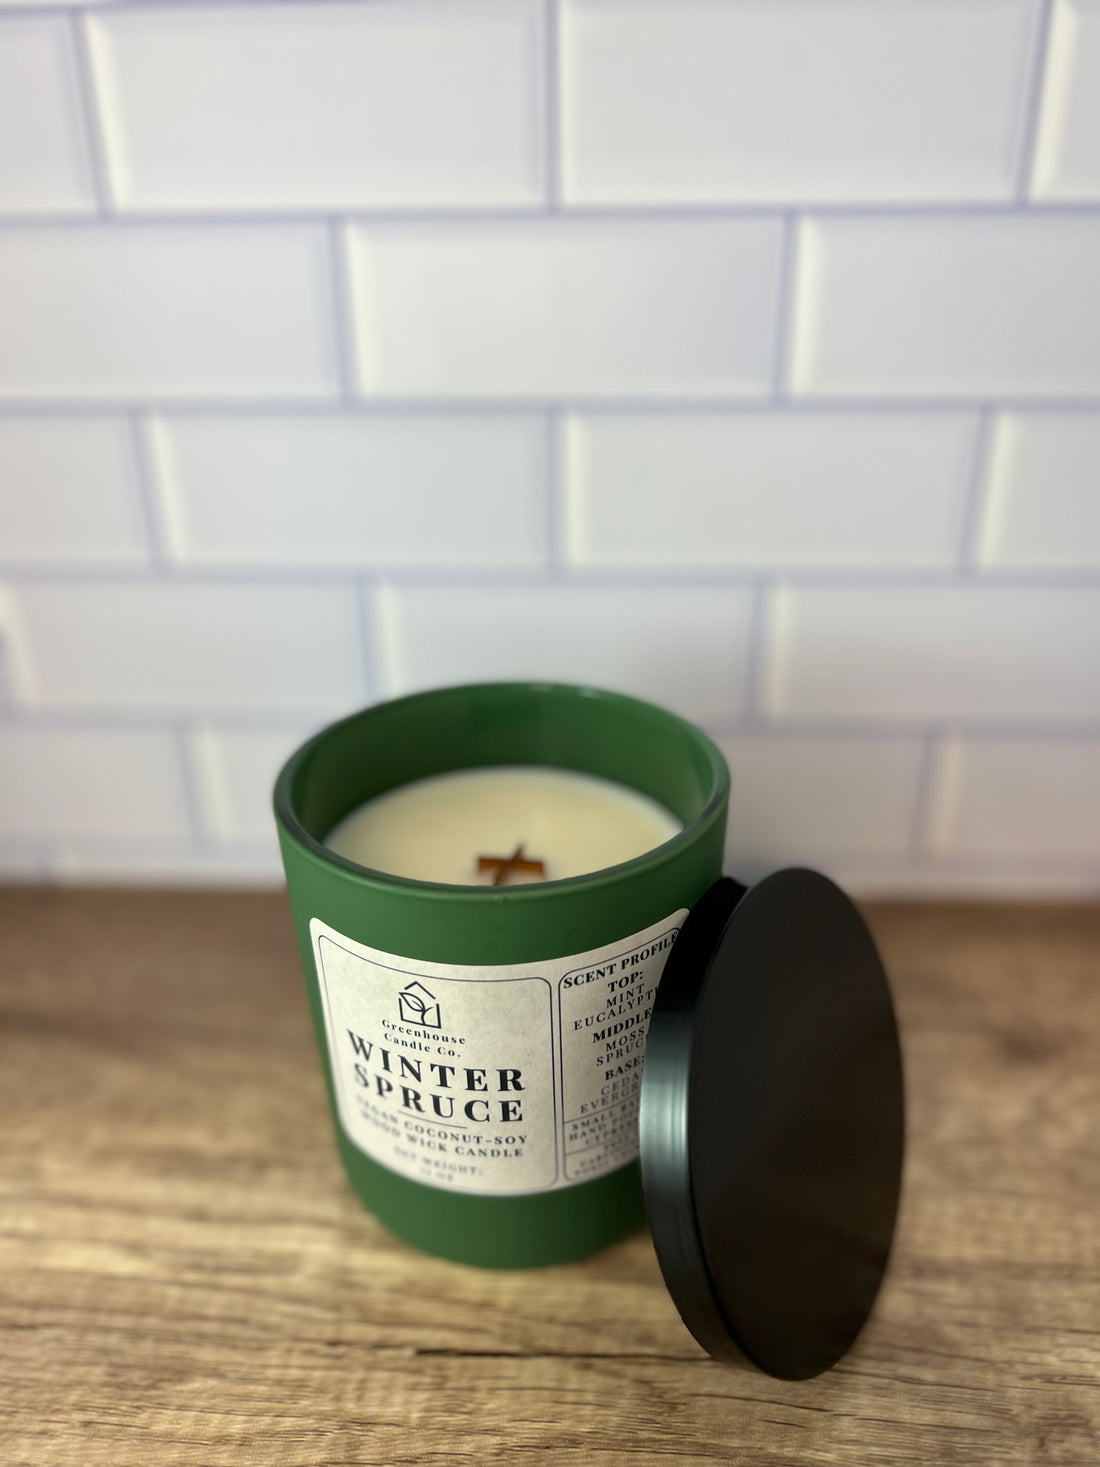 Winter Spruce - Greenhouse Candle Co. - 